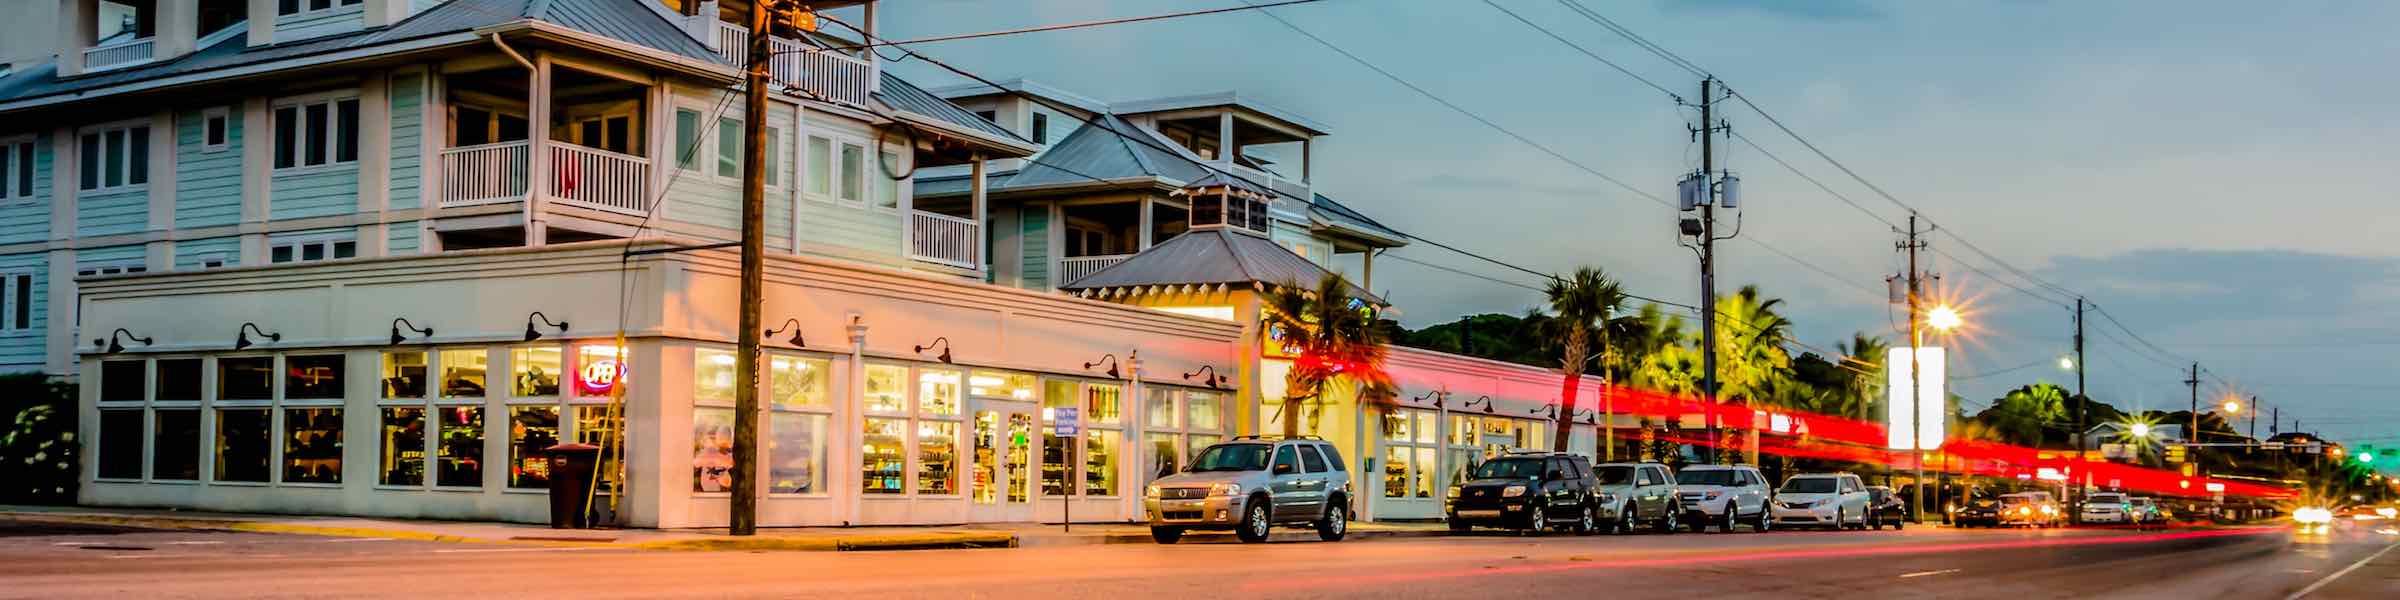 Dusk scene along Butler Avenue, Tybee Island, showing a brightly lit store front and streaks of light from passing vehicles.